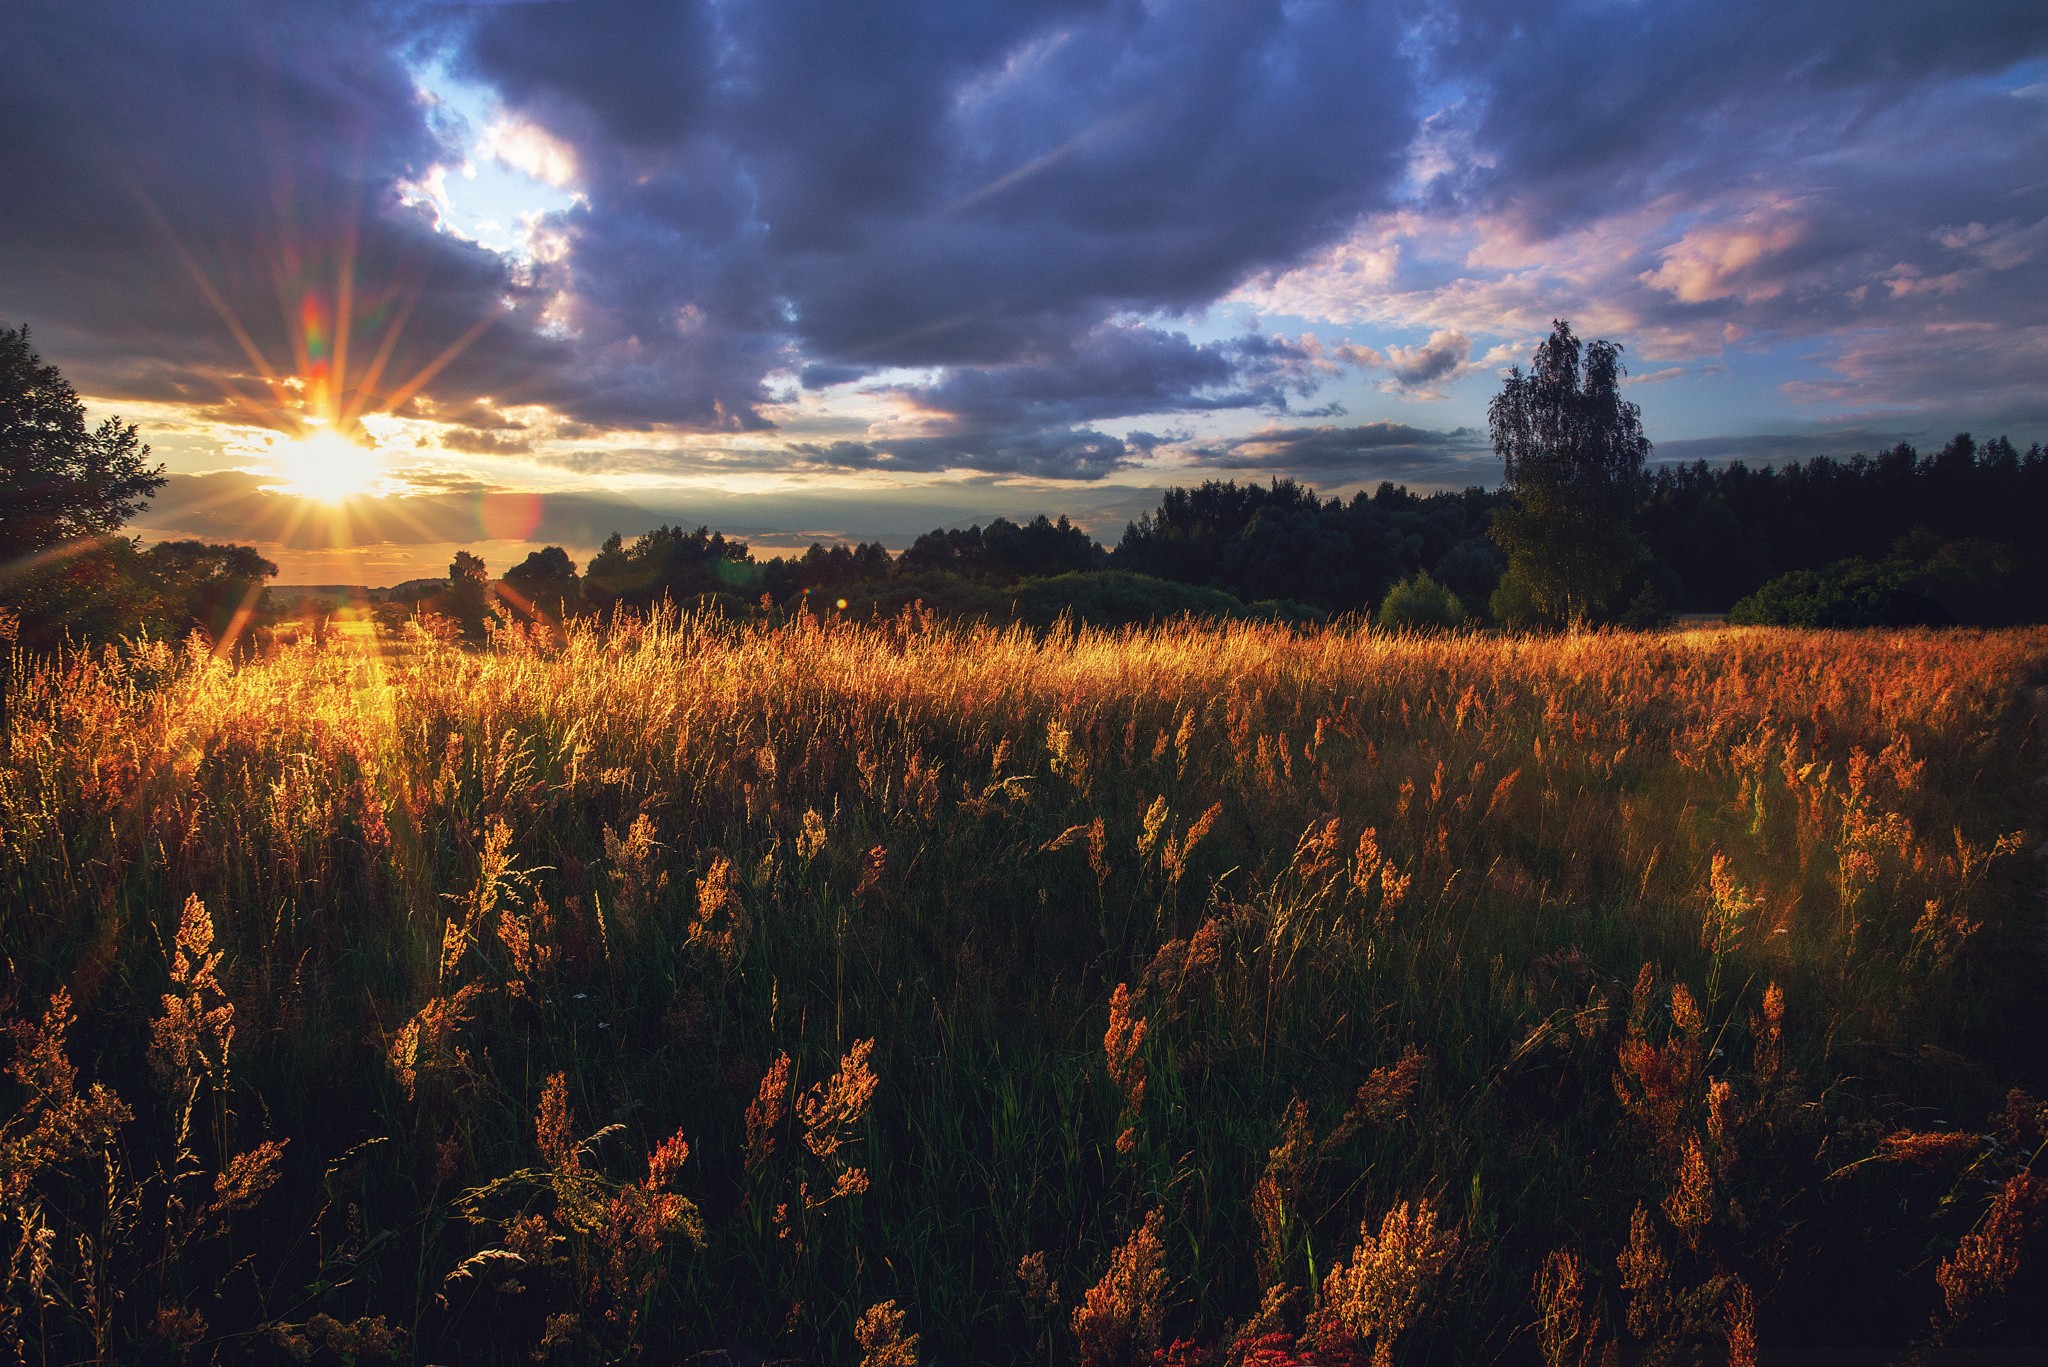 General 2048x1367 Russia landscape field lens flare sunlight overcast dry grass trees nature